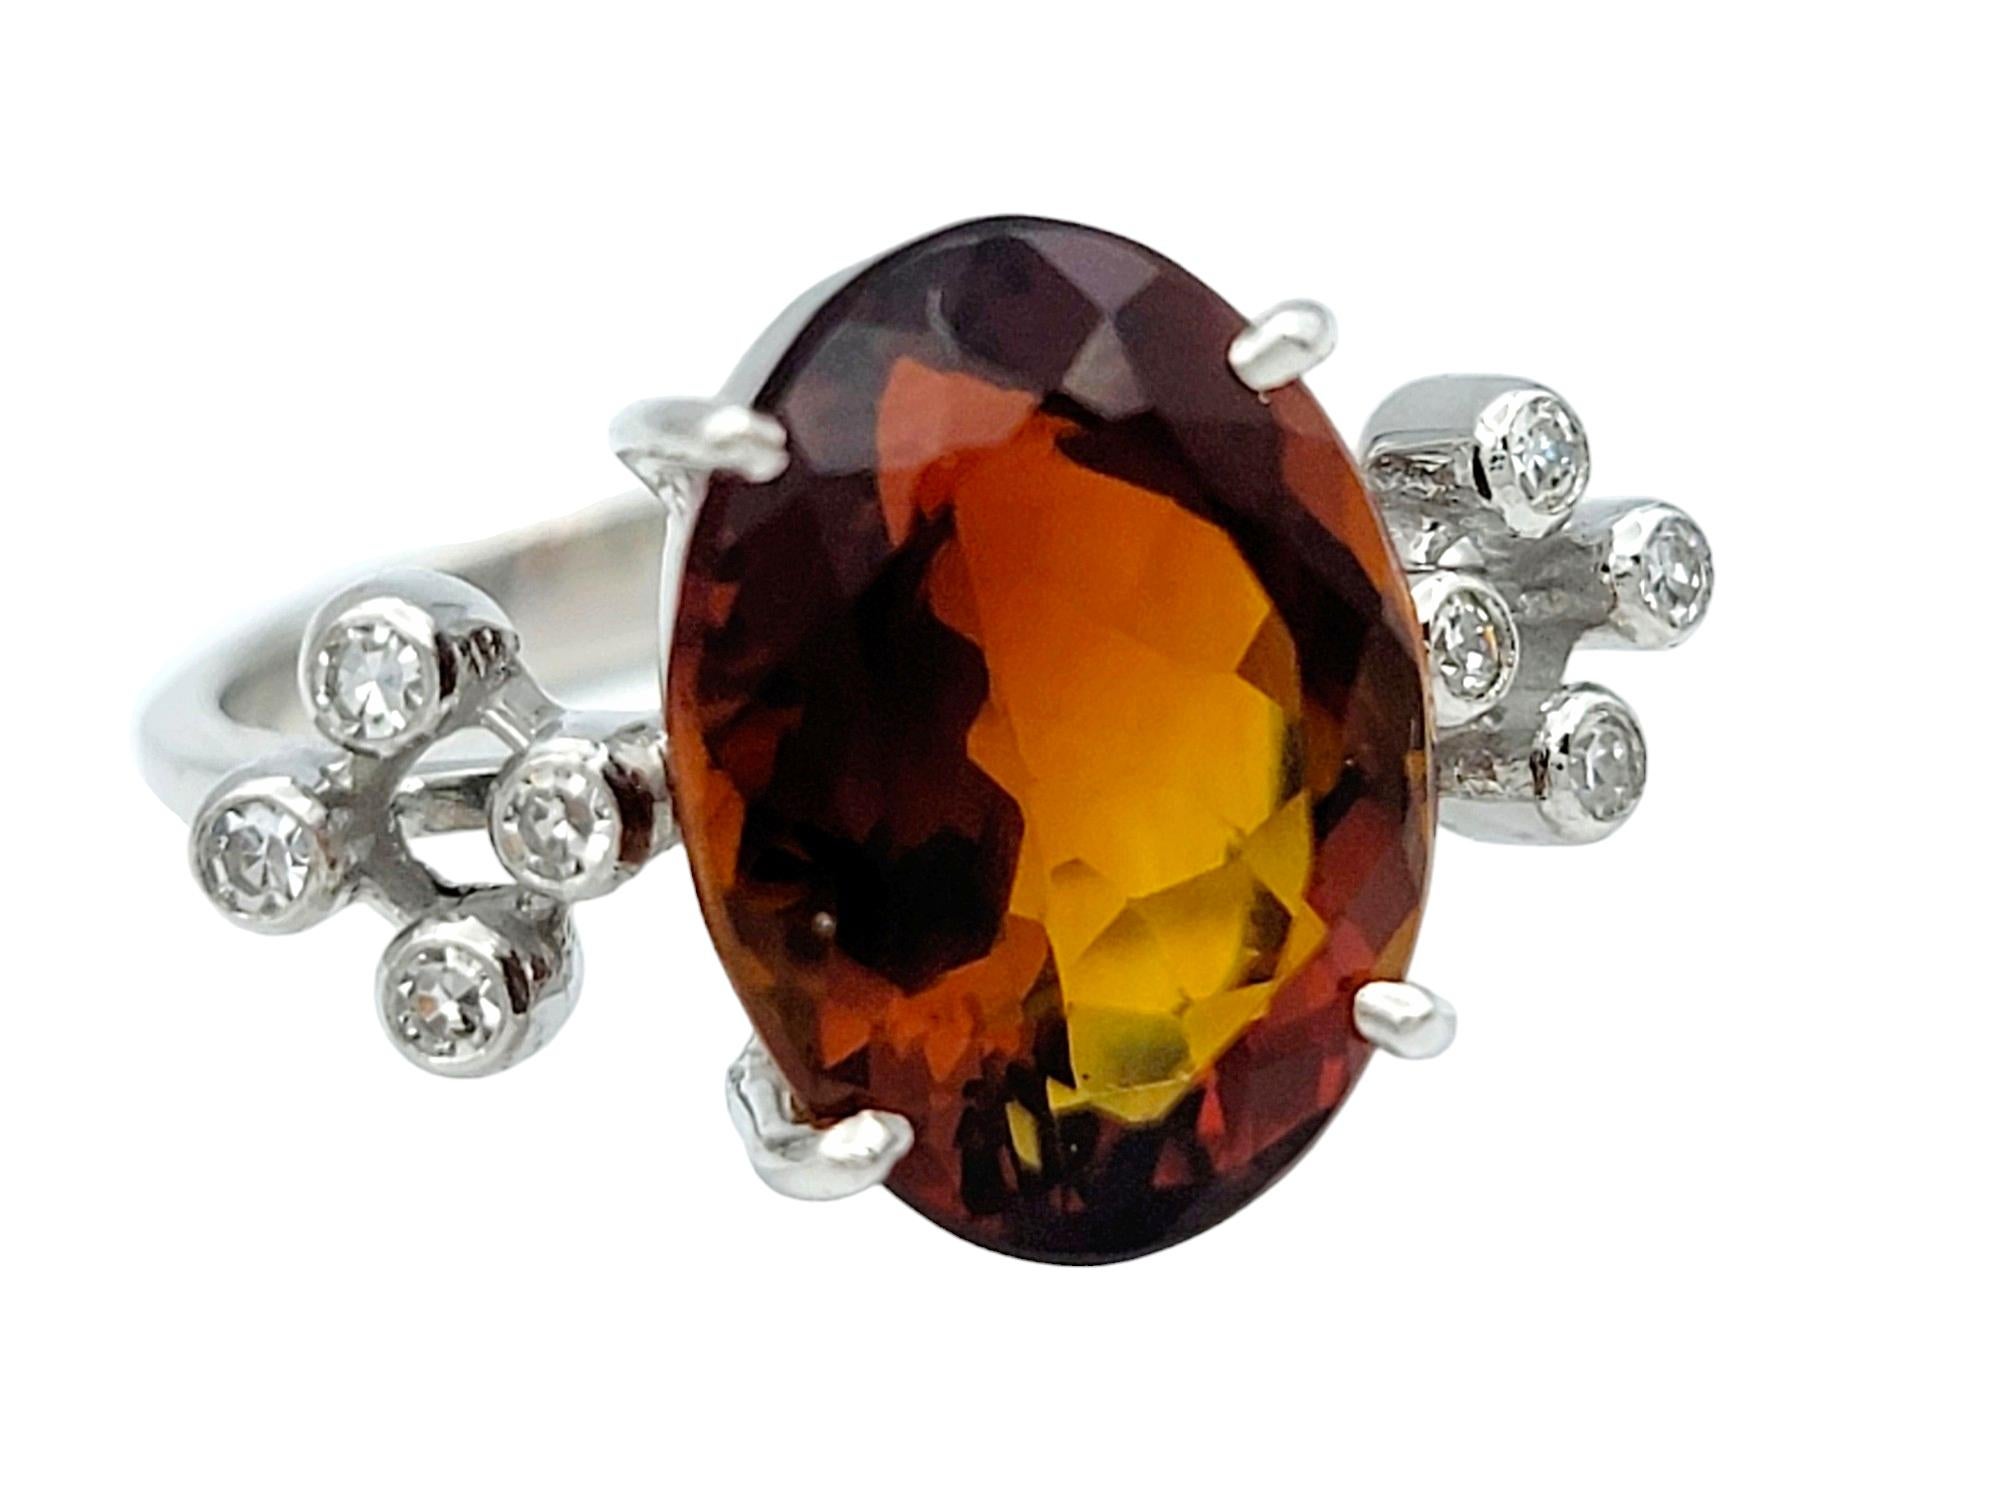 Ring Size: 5.75

Crafted with exquisite detail, this unique ring showcases a striking oval citrine at its center, boasting a deep orangy-brown hue that exudes warmth and sophistication. The citrine is complemented by a halo of dazzling diamonds,